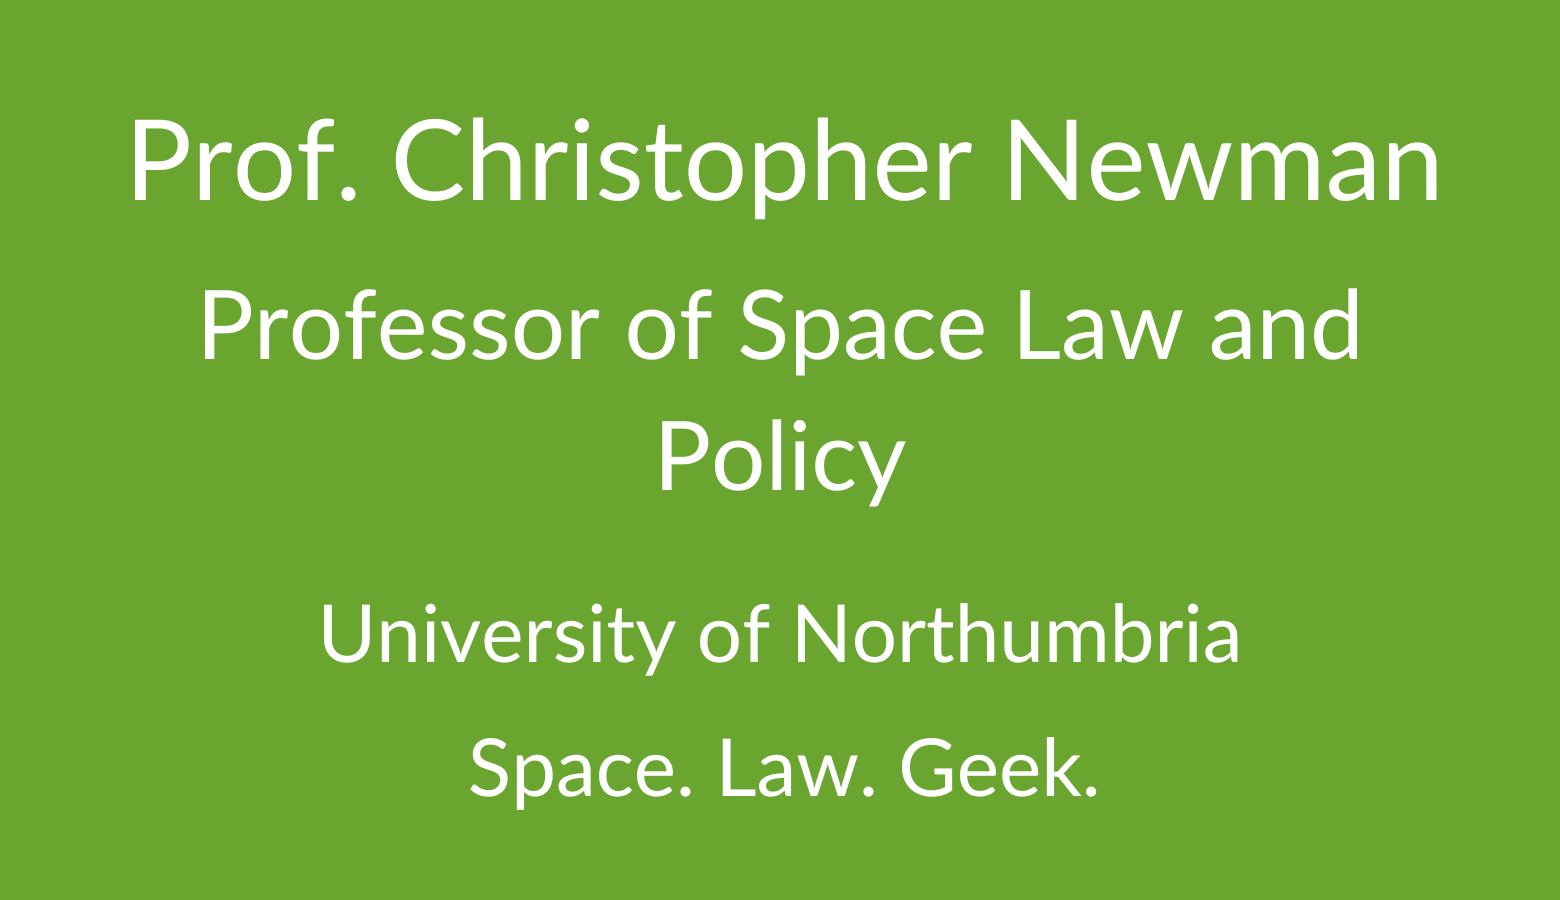 Proessor Chris Newman. Professor of Space Law and Policy. University of Northumbria. Space. Law. Geek